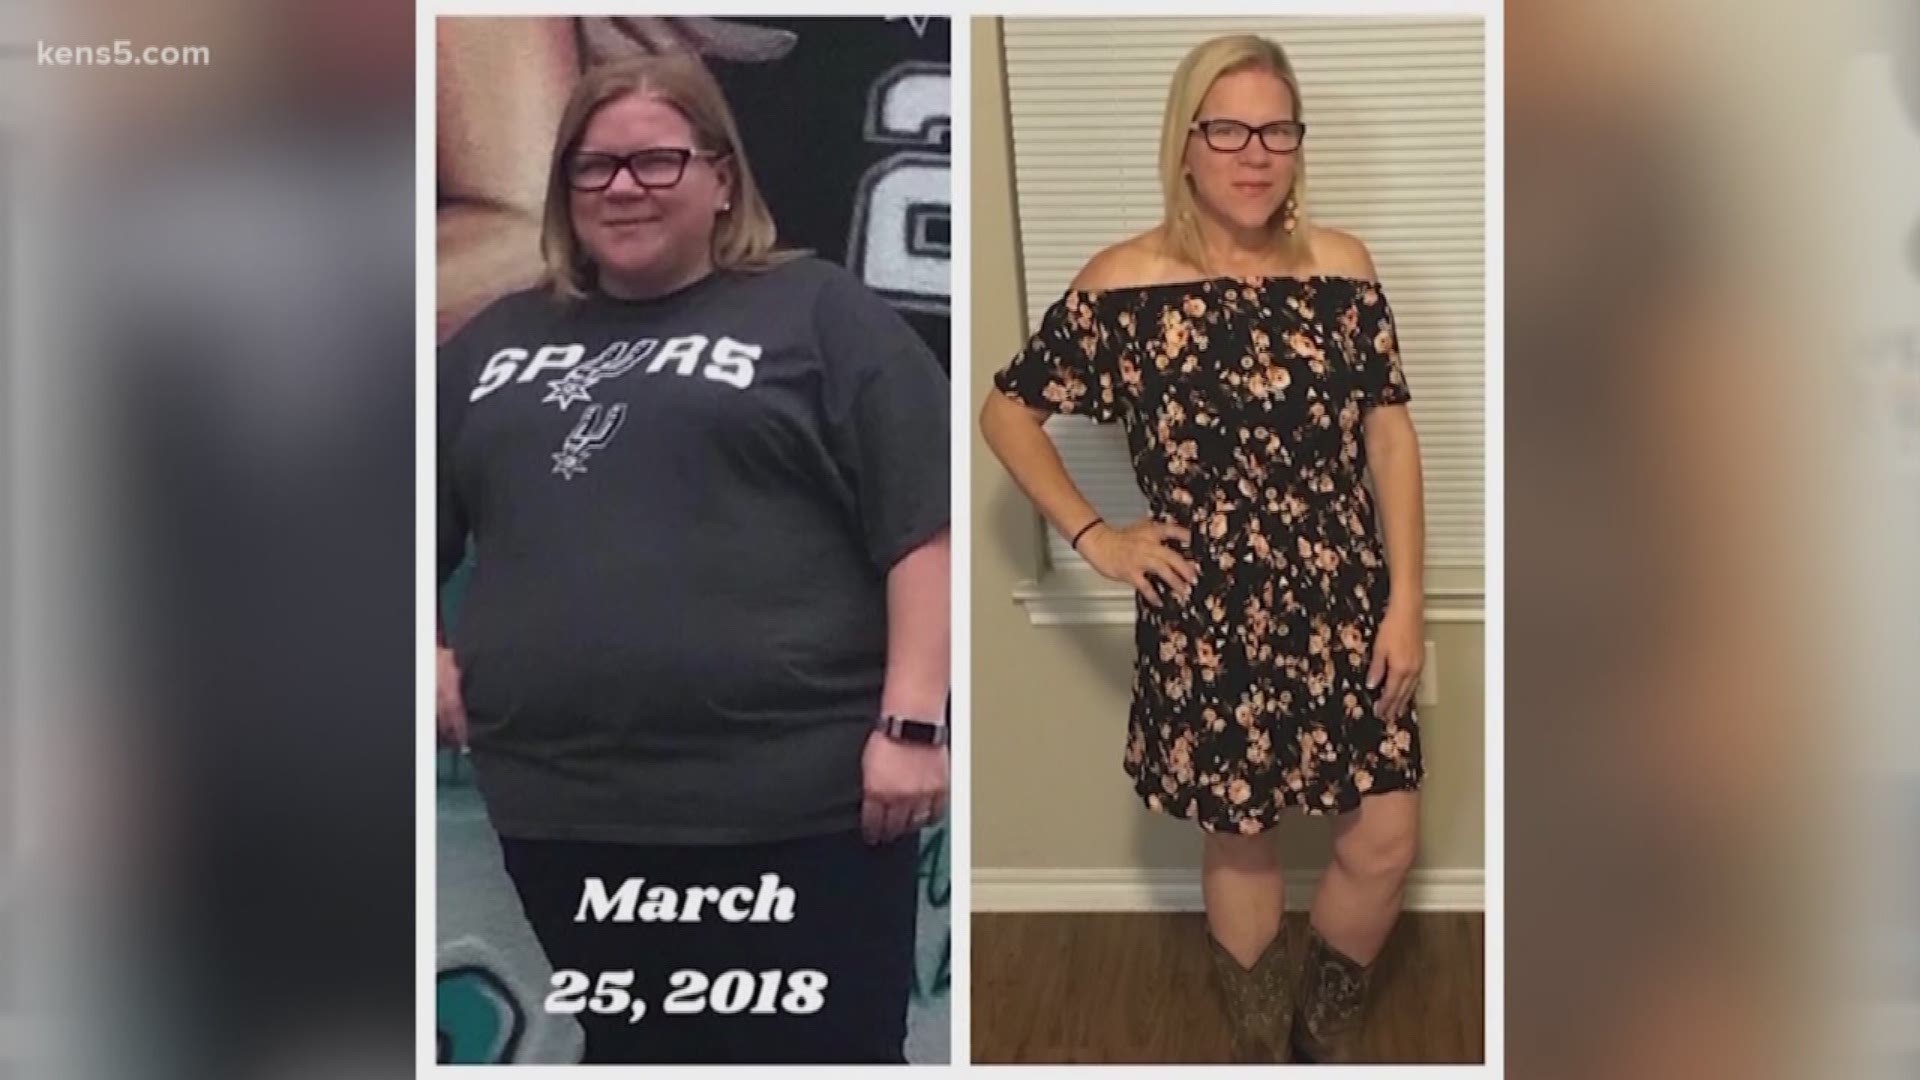 A San Antonio teacher had the chance to save her friend's life, but she had to lose a lot of weight to do it. She says making that choice saved her own life too.